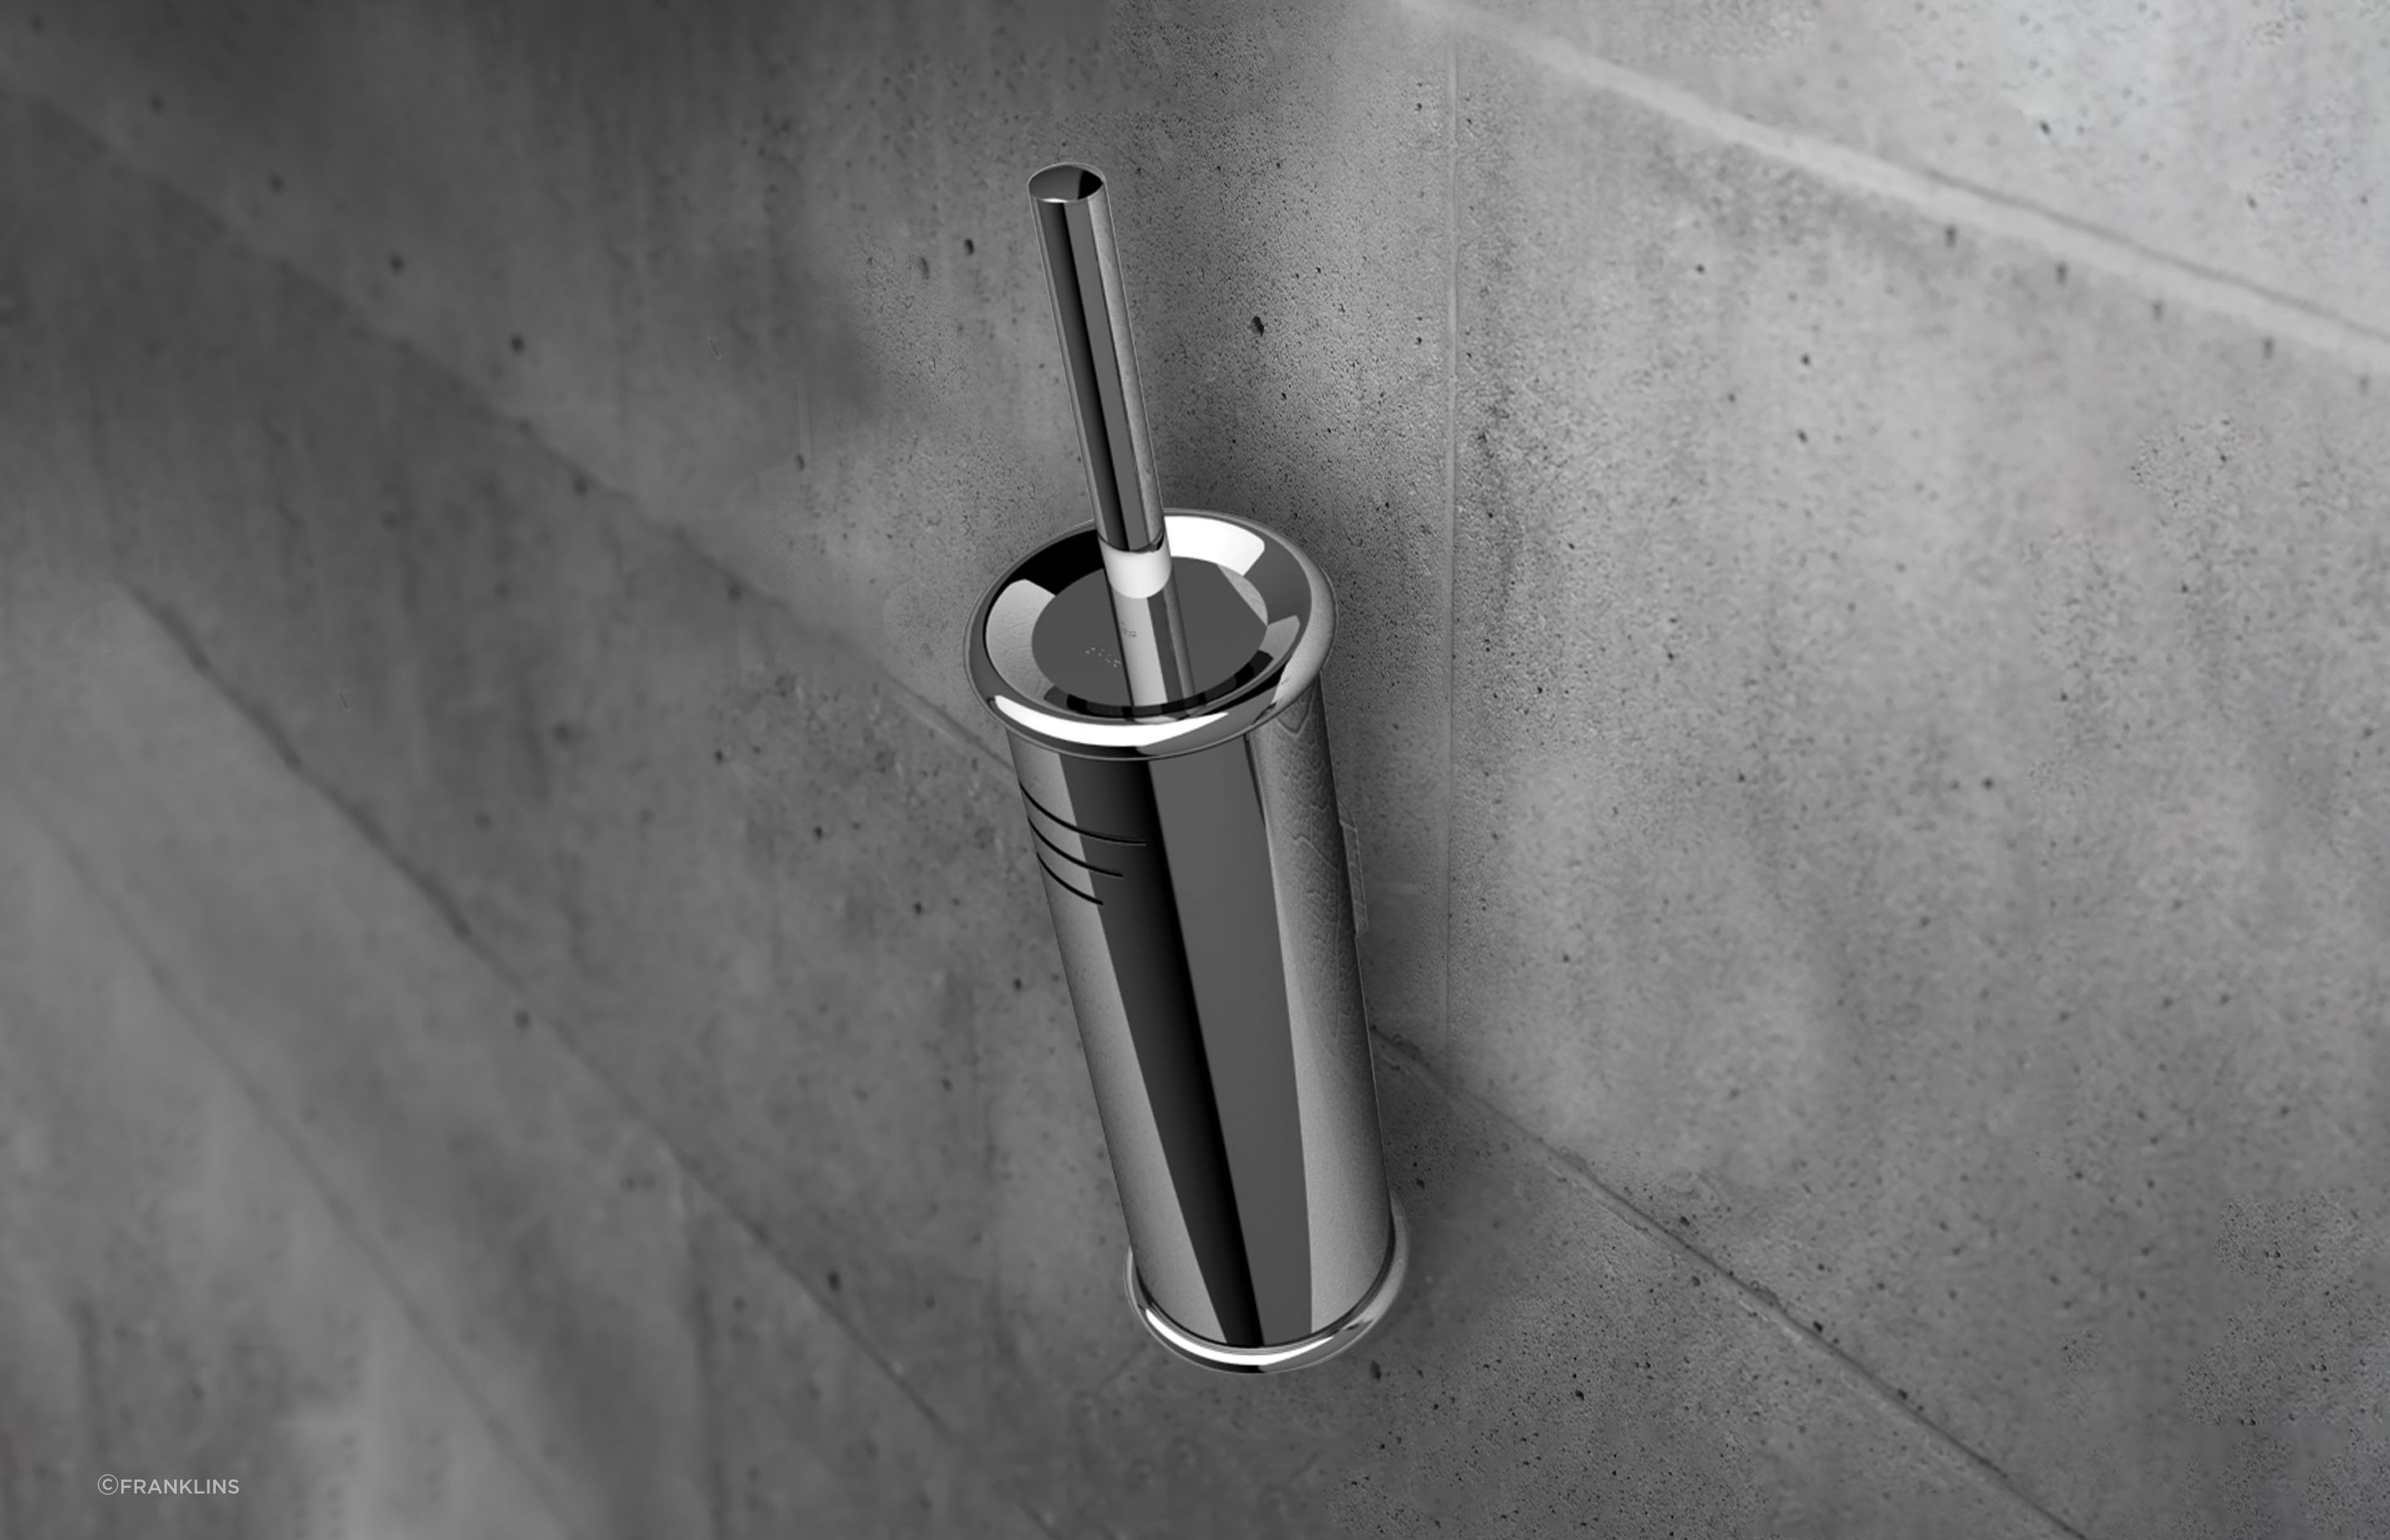 The toilet brush holder from the Geesa Standard Hotel Collection exudes luxury and class.